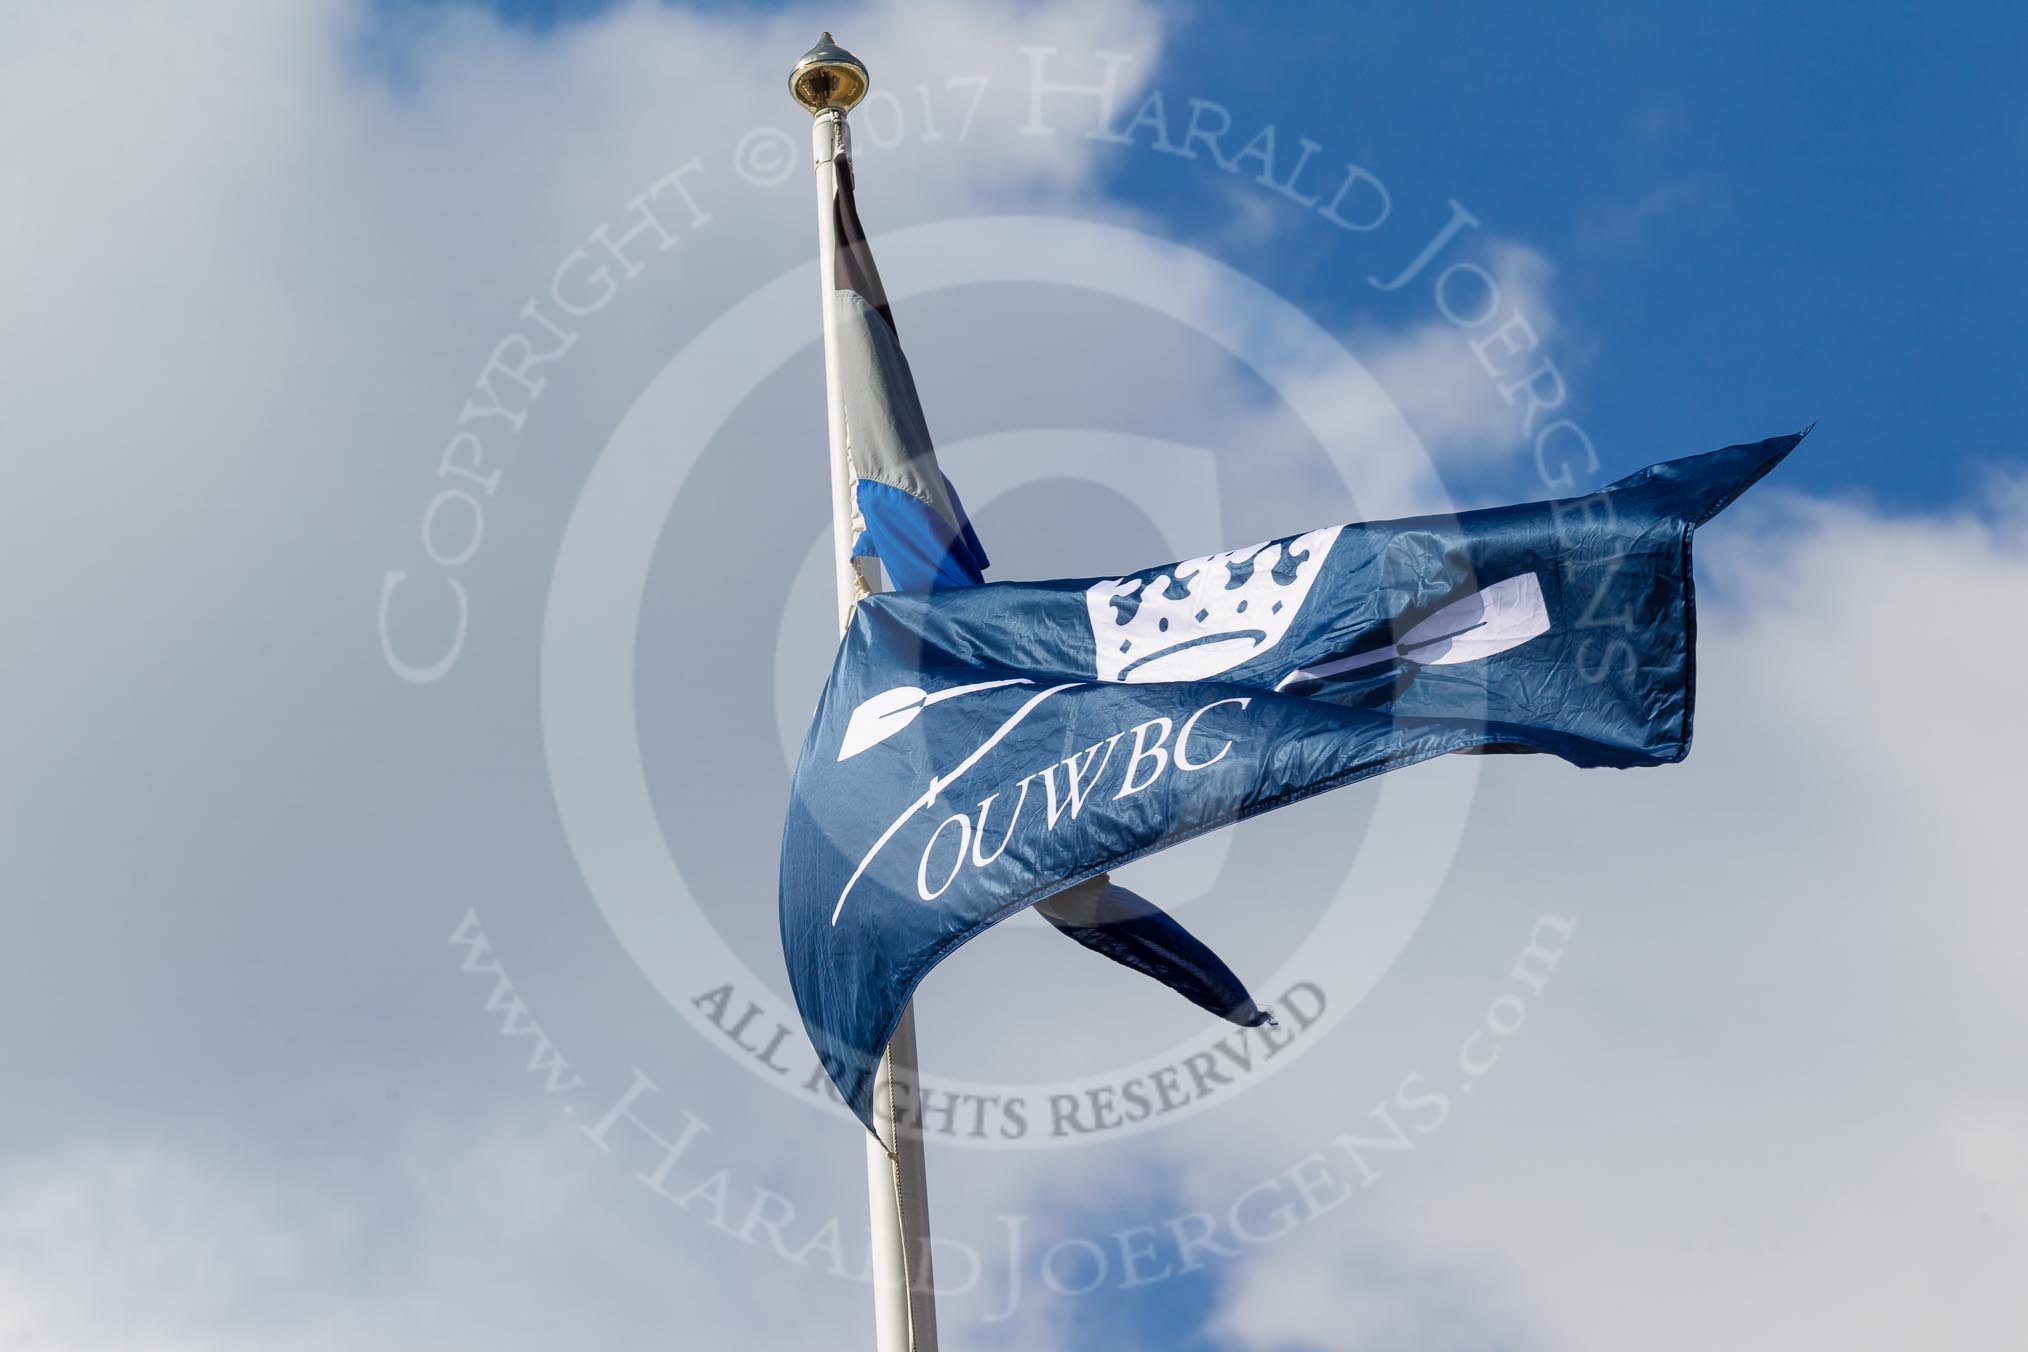 The Boat Race season 2017 -  The Cancer Research Women's Boat Race: The OUWBC flag flying high above the boat house used by the Oxford squad.
River Thames between Putney Bridge and Mortlake,
London SW15,

United Kingdom,
on 02 April 2017 at 14:19, image #14